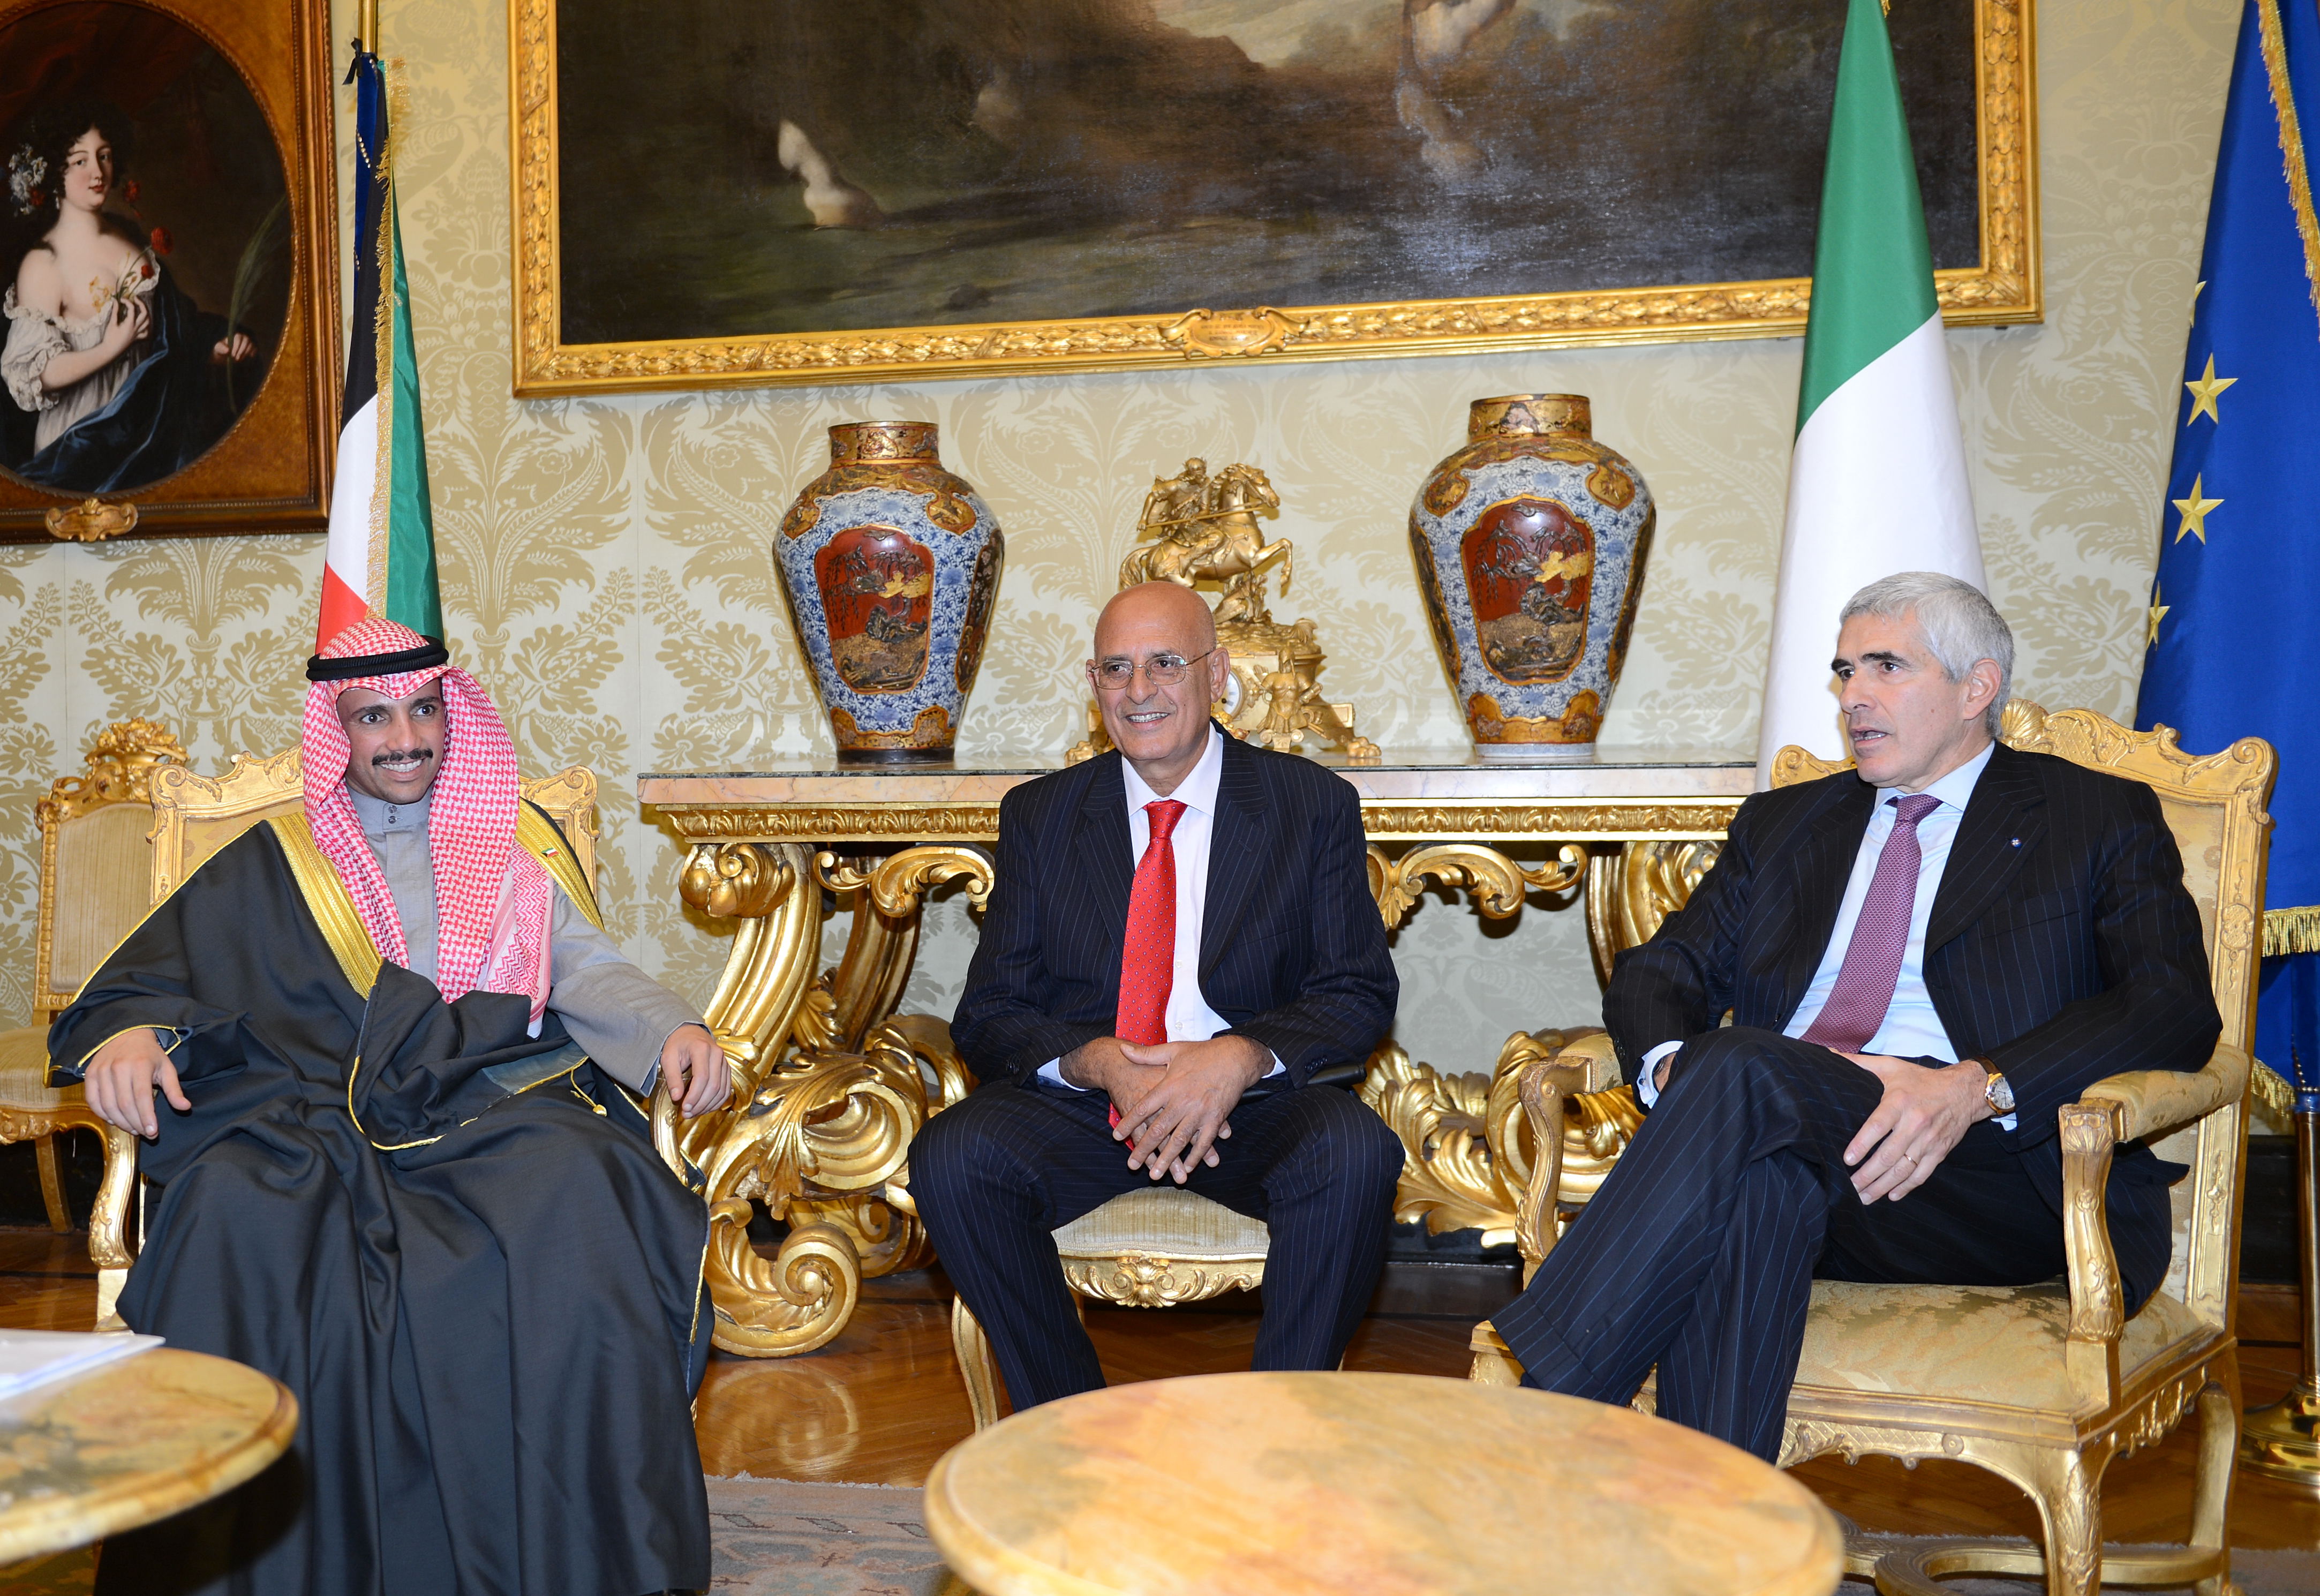 Speaker of the National Assembly Marzouq Ali Al-Ghanem with Chairman of the Foreign Affairs Committee of the Italian Senate Pier Ferdinando Casini